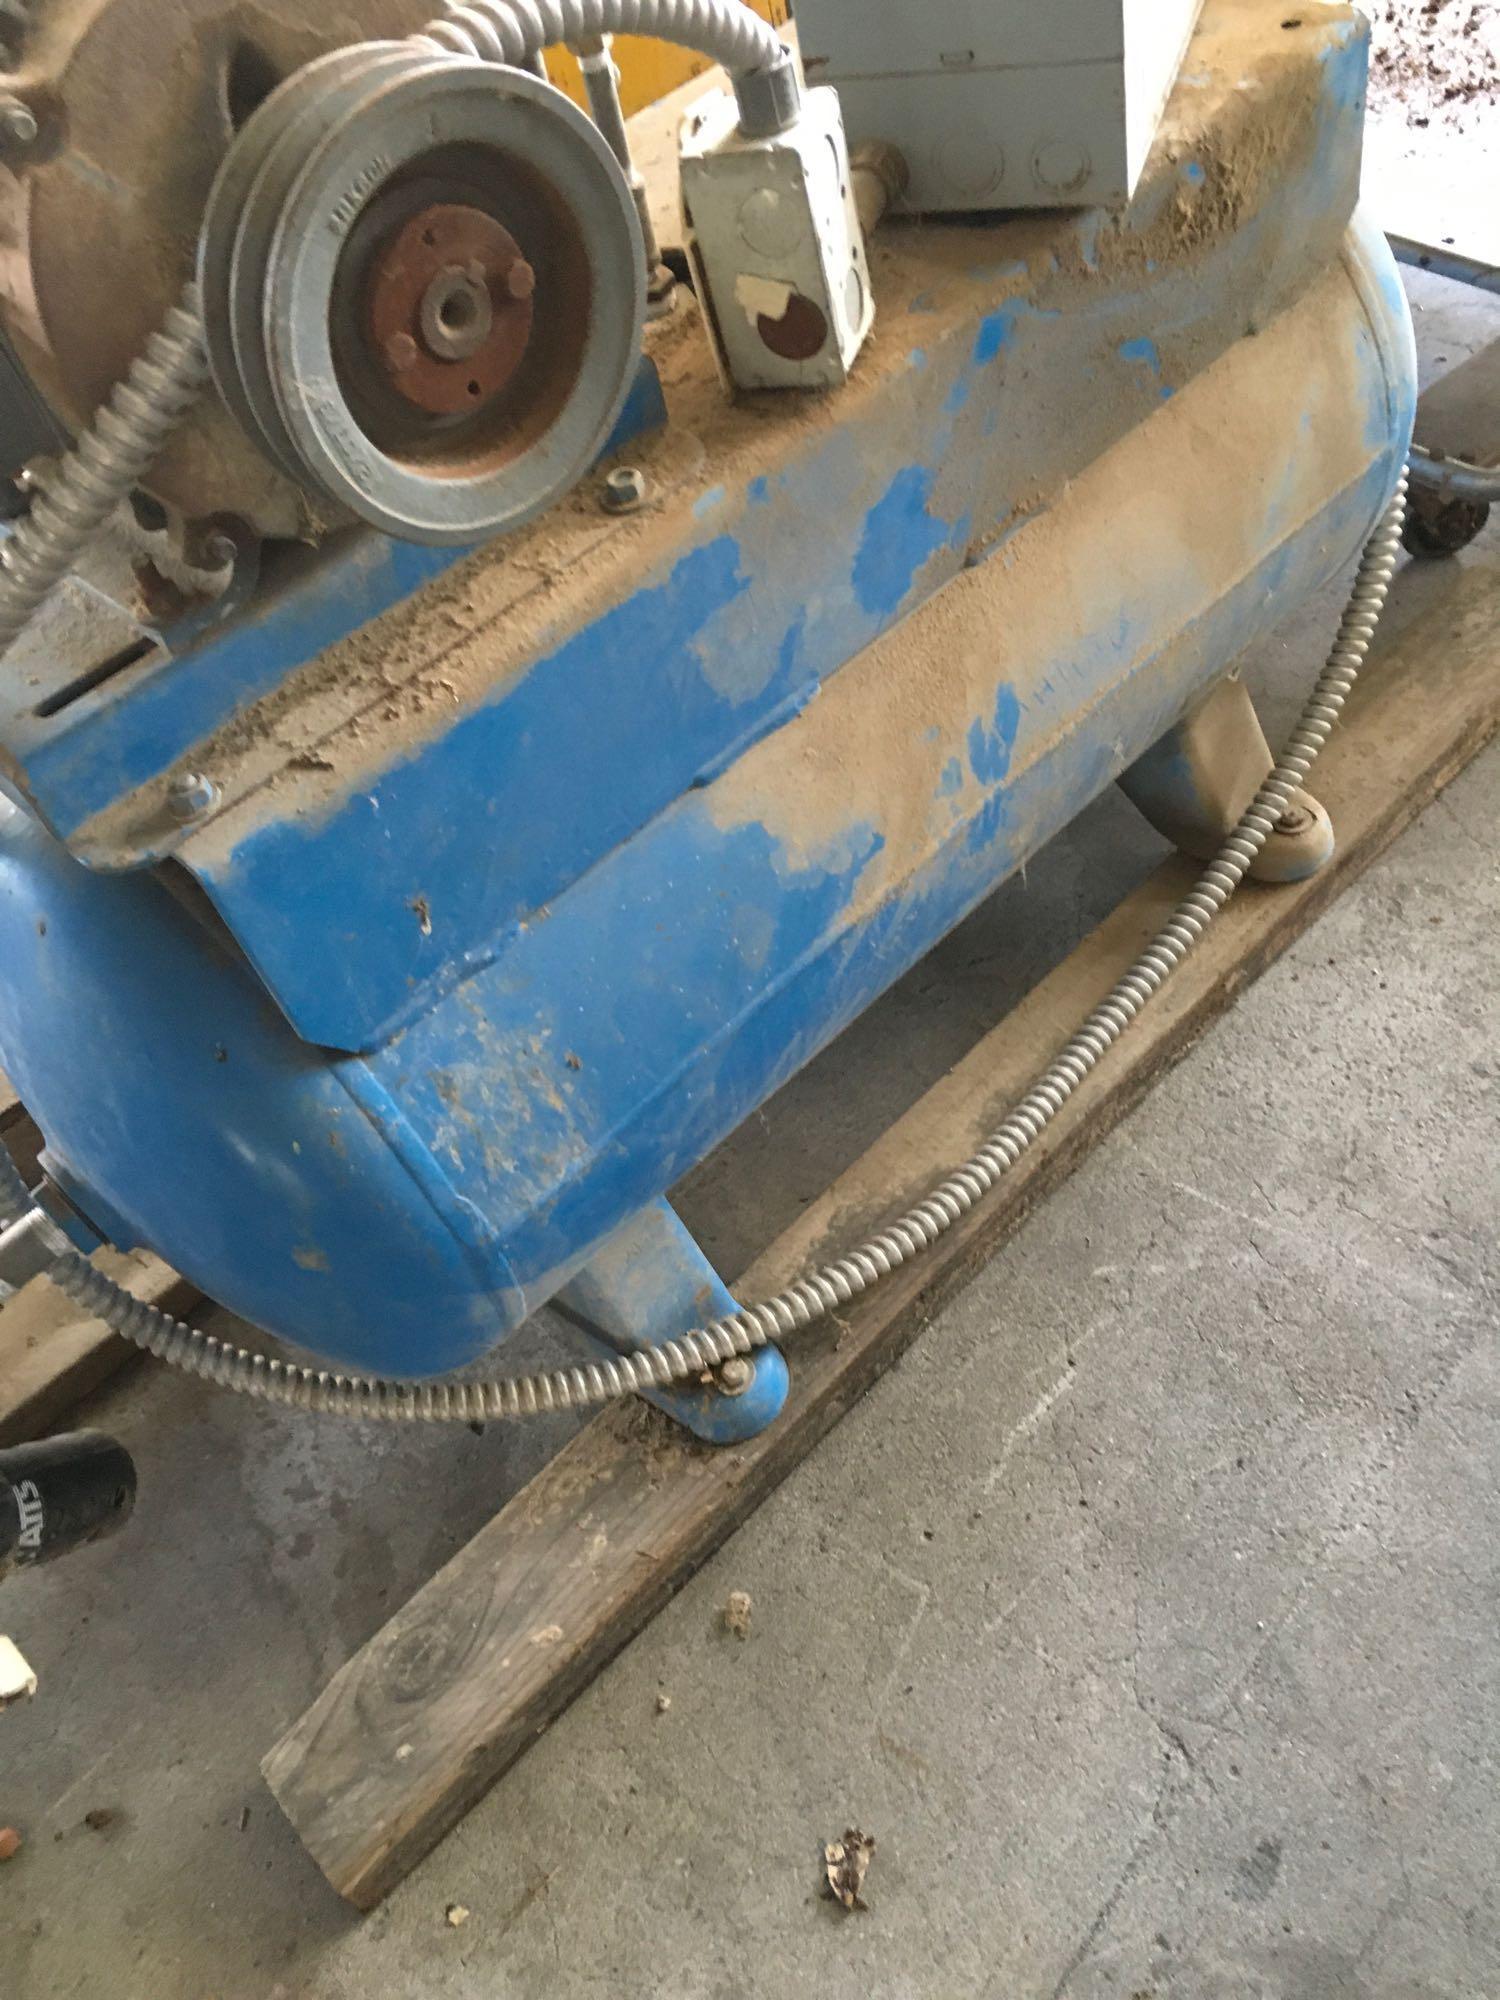 Air Compressor - MISSING PARTS - UNTESTED